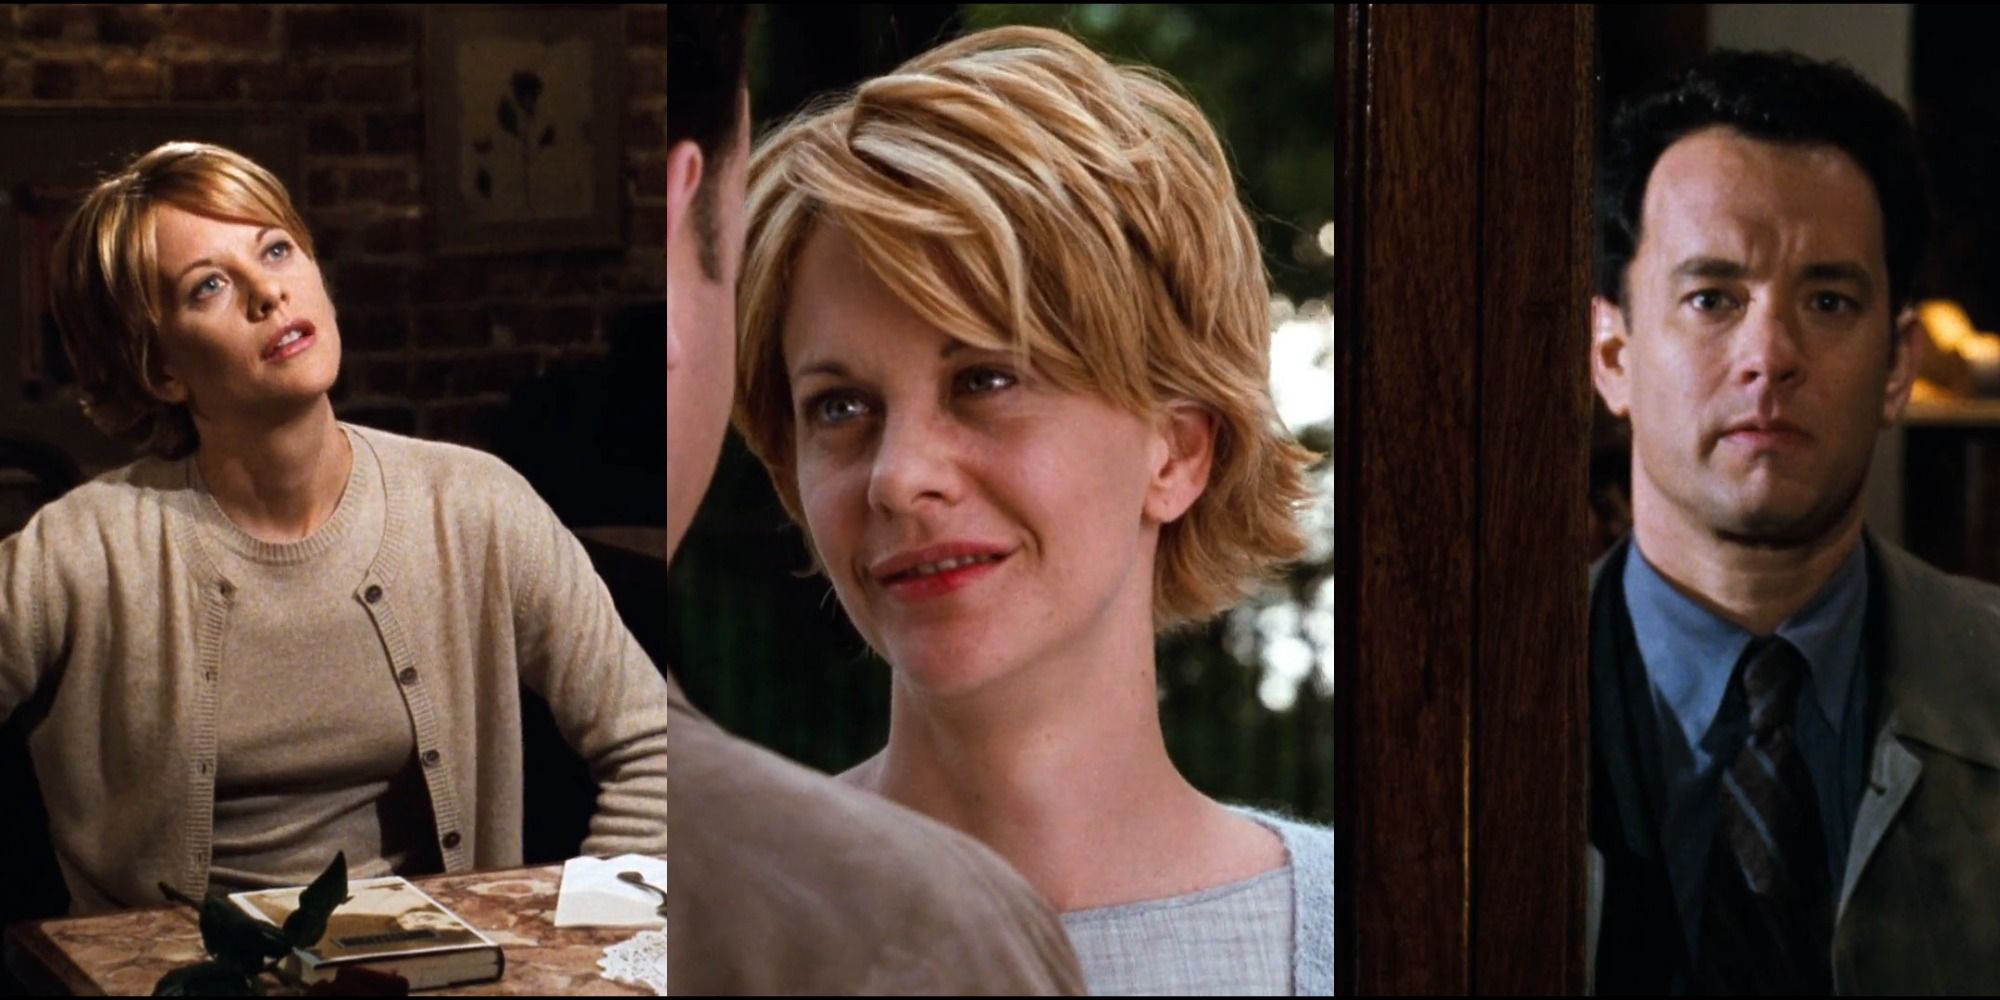 Main feature image showing Kathleen and Joe from You've Got Mail